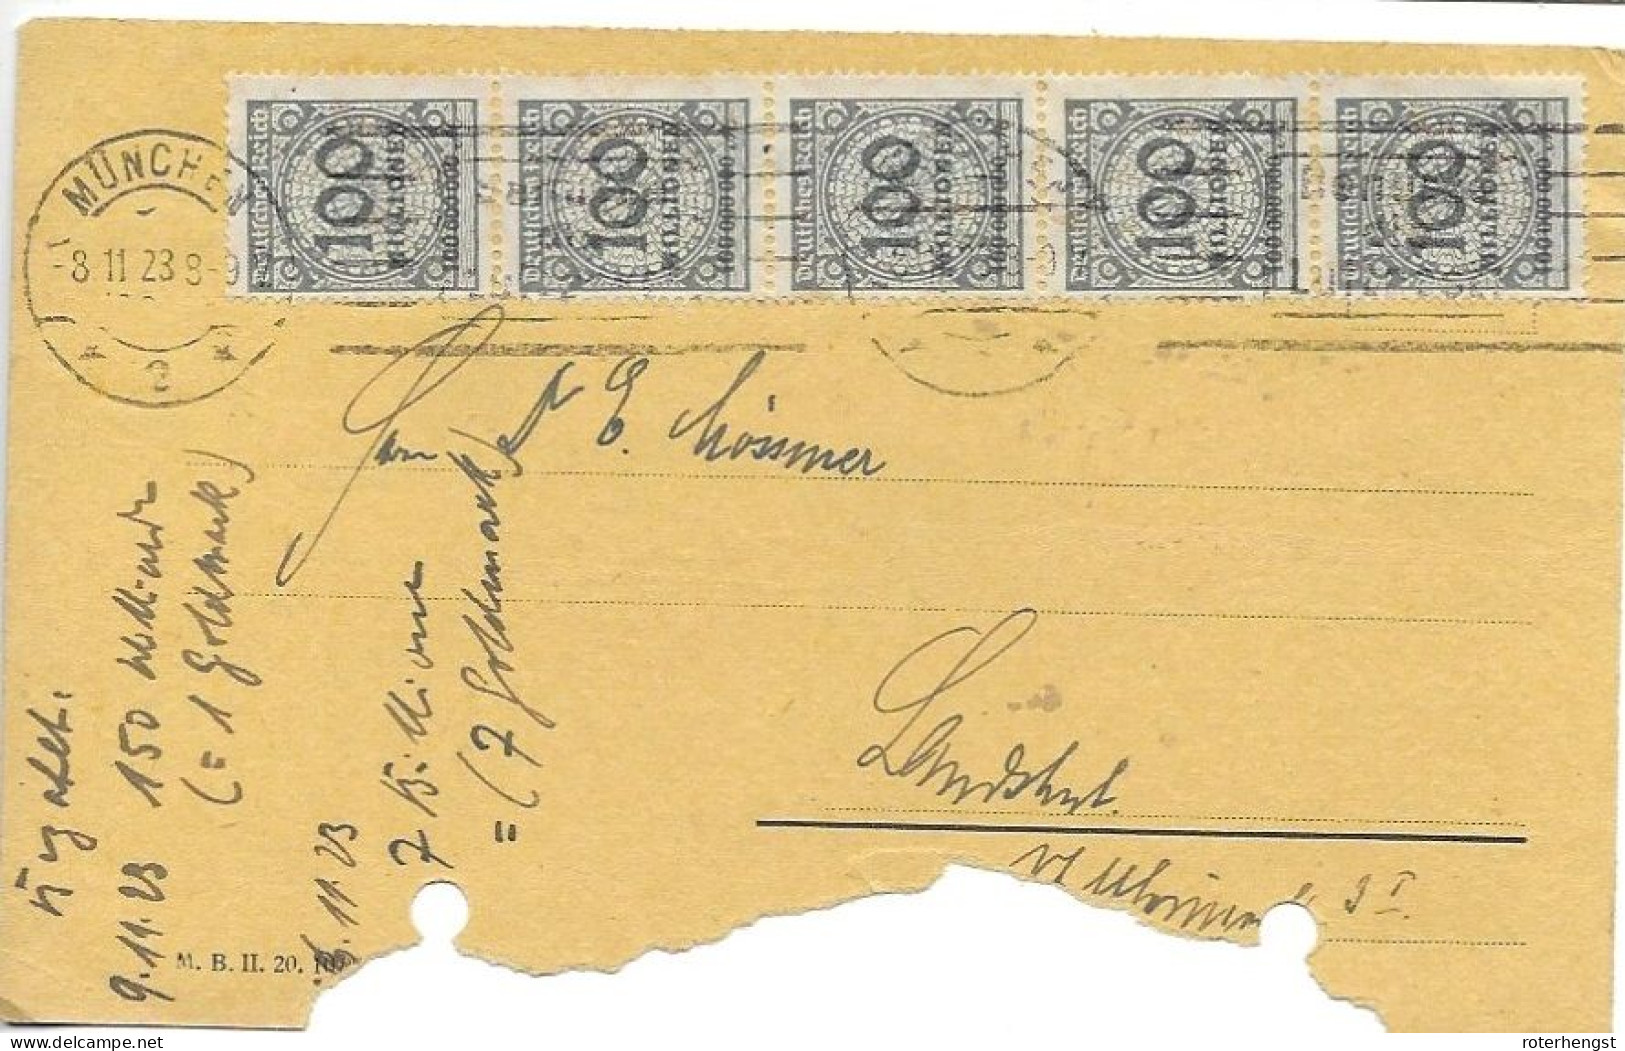 Germany Infla Card Damaged Muenchen 8.11.1923 11,5 Euros - Covers & Documents